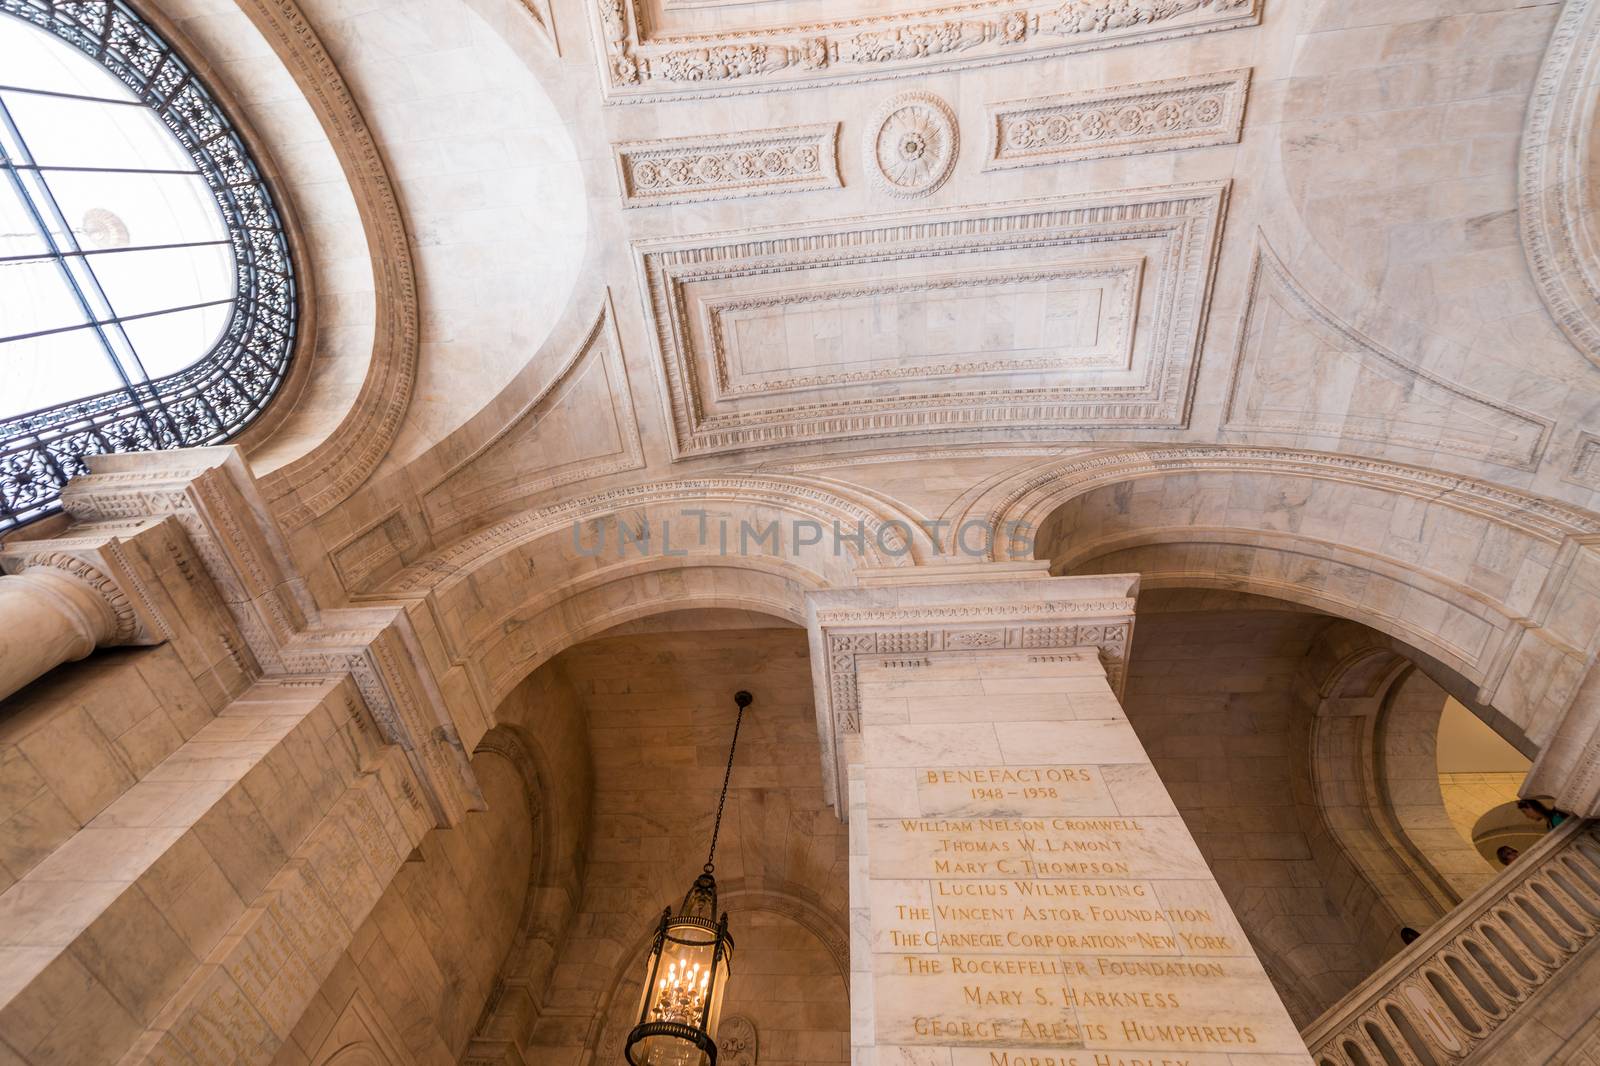 NEW YORK CITY - MAY 20: Interior of New York Public Library on M by jovannig